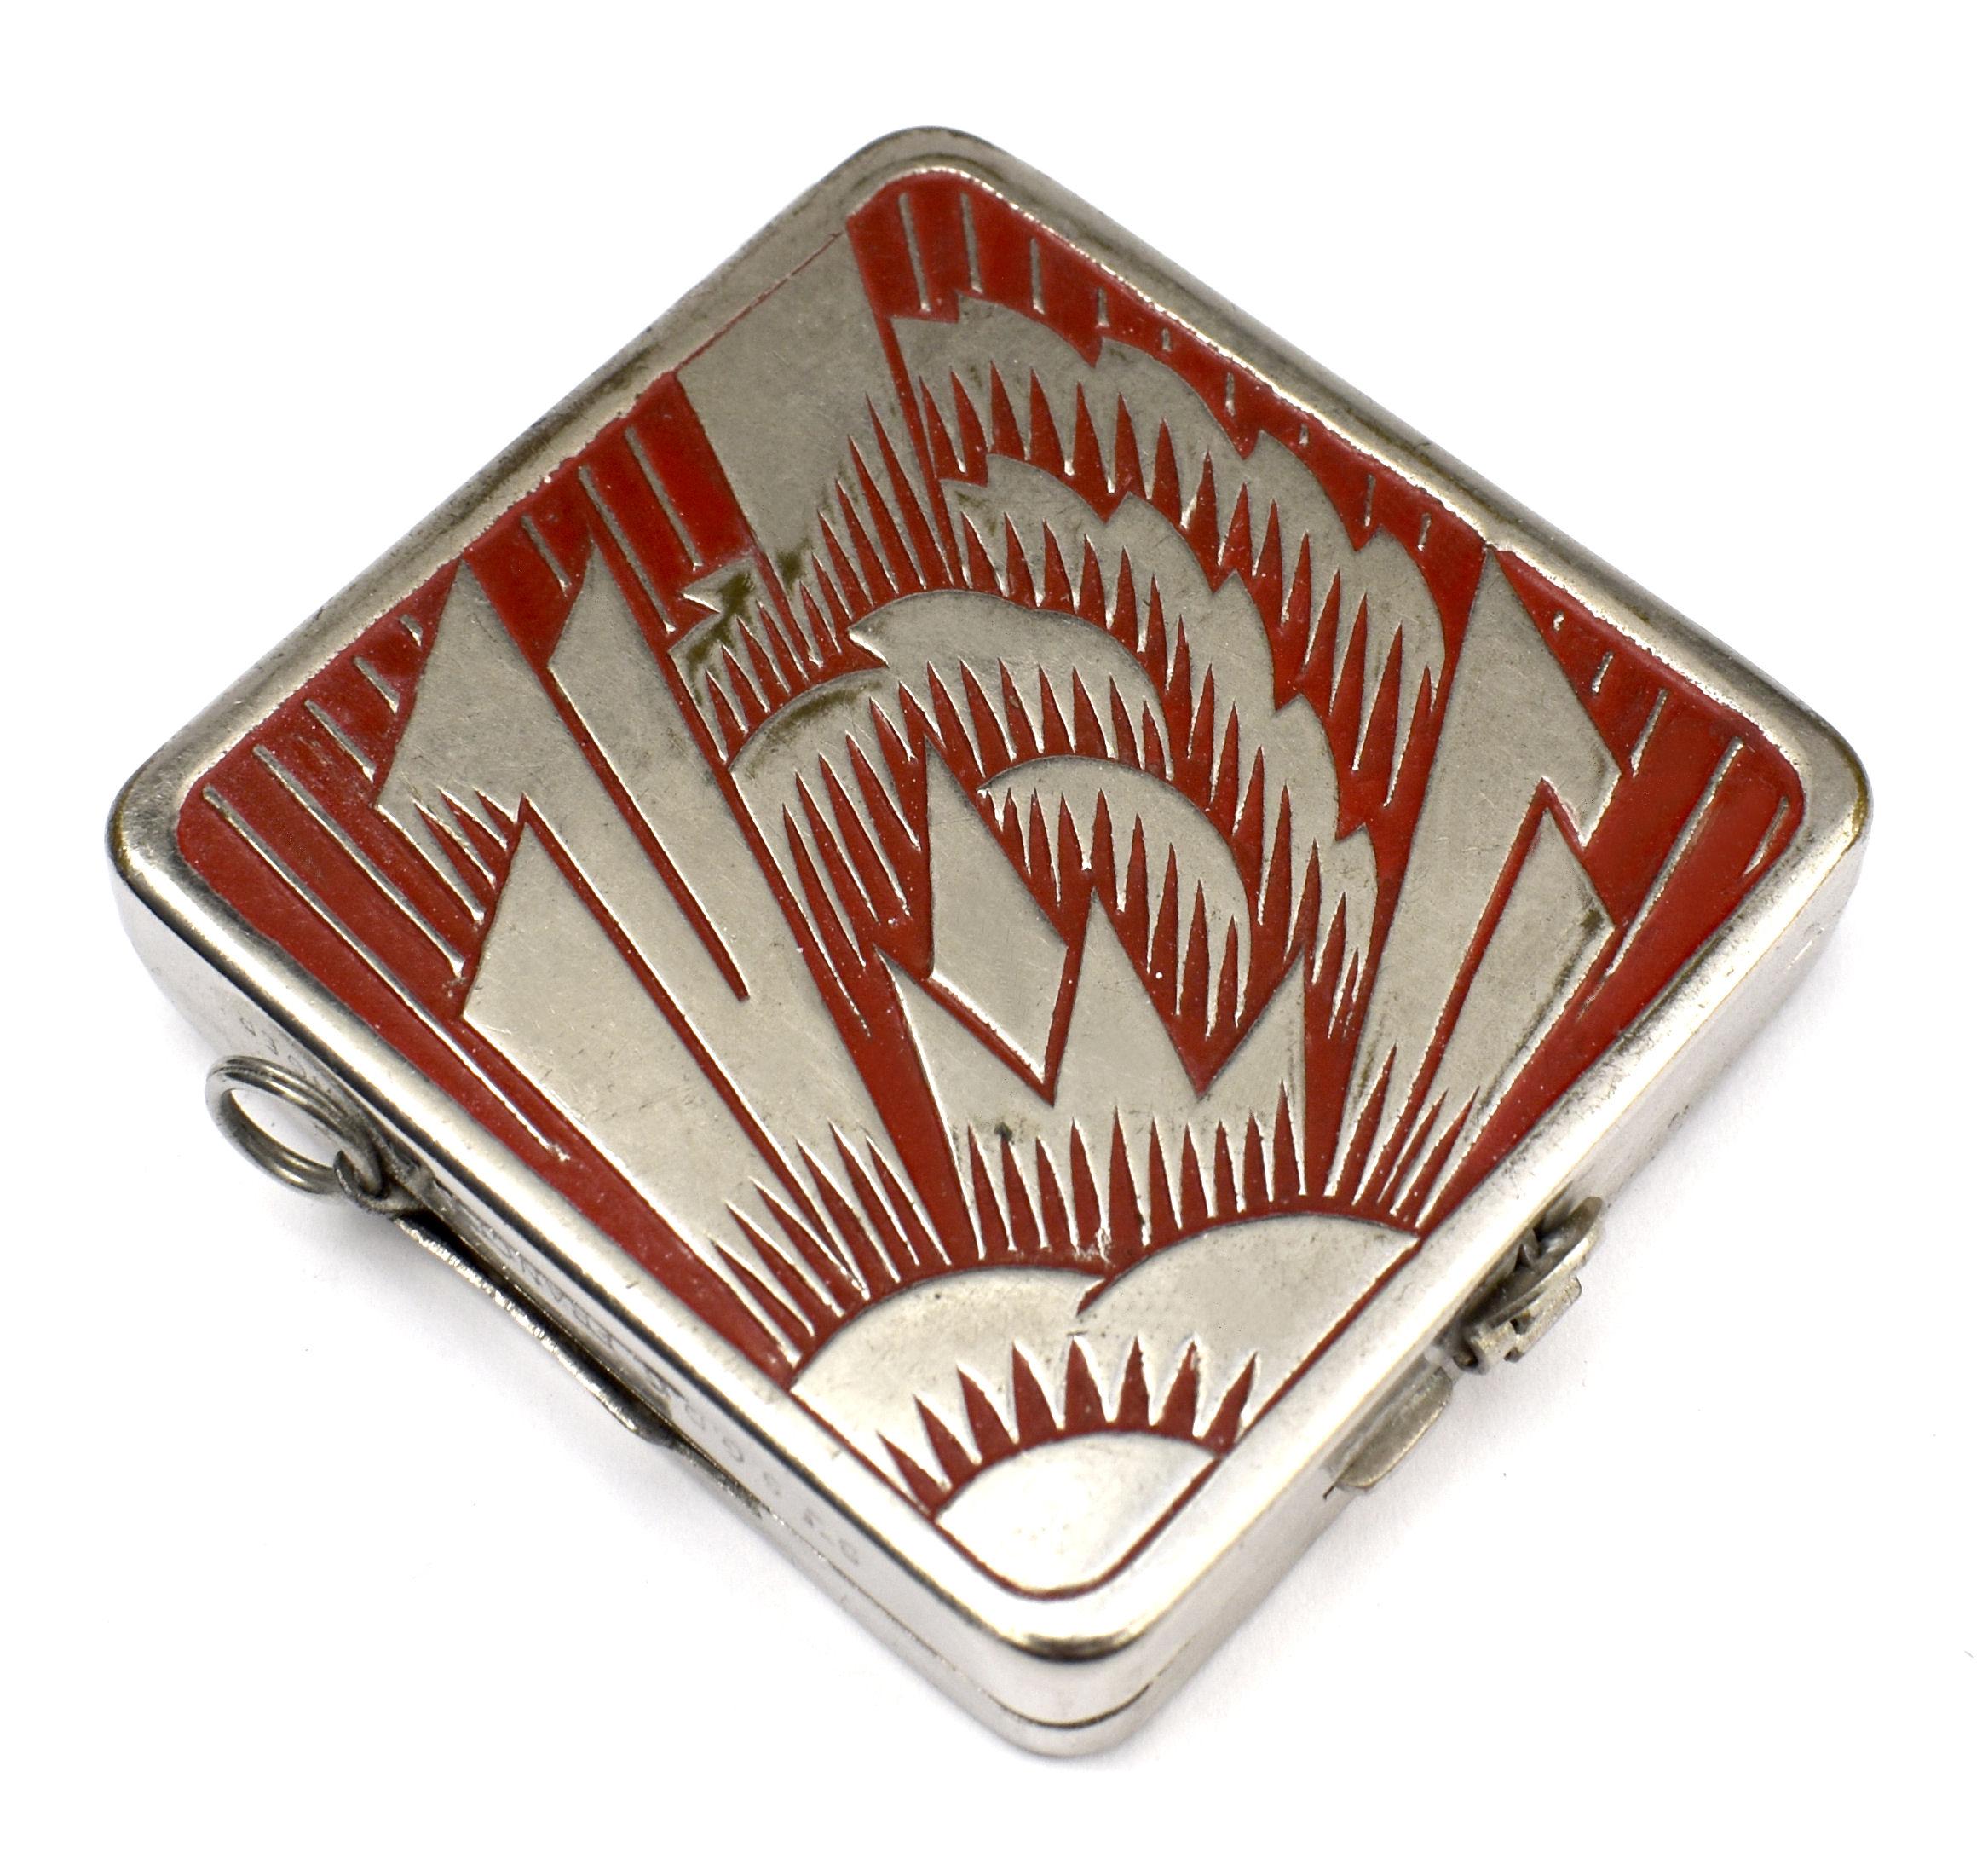 This is a really cute and rare find, a 1930's Art Deco compact with the most delightful enamel decoration, featuring a red geometric design on a chrome casing. The interior is an engineers delight with a sliding latch on the side of the compact to